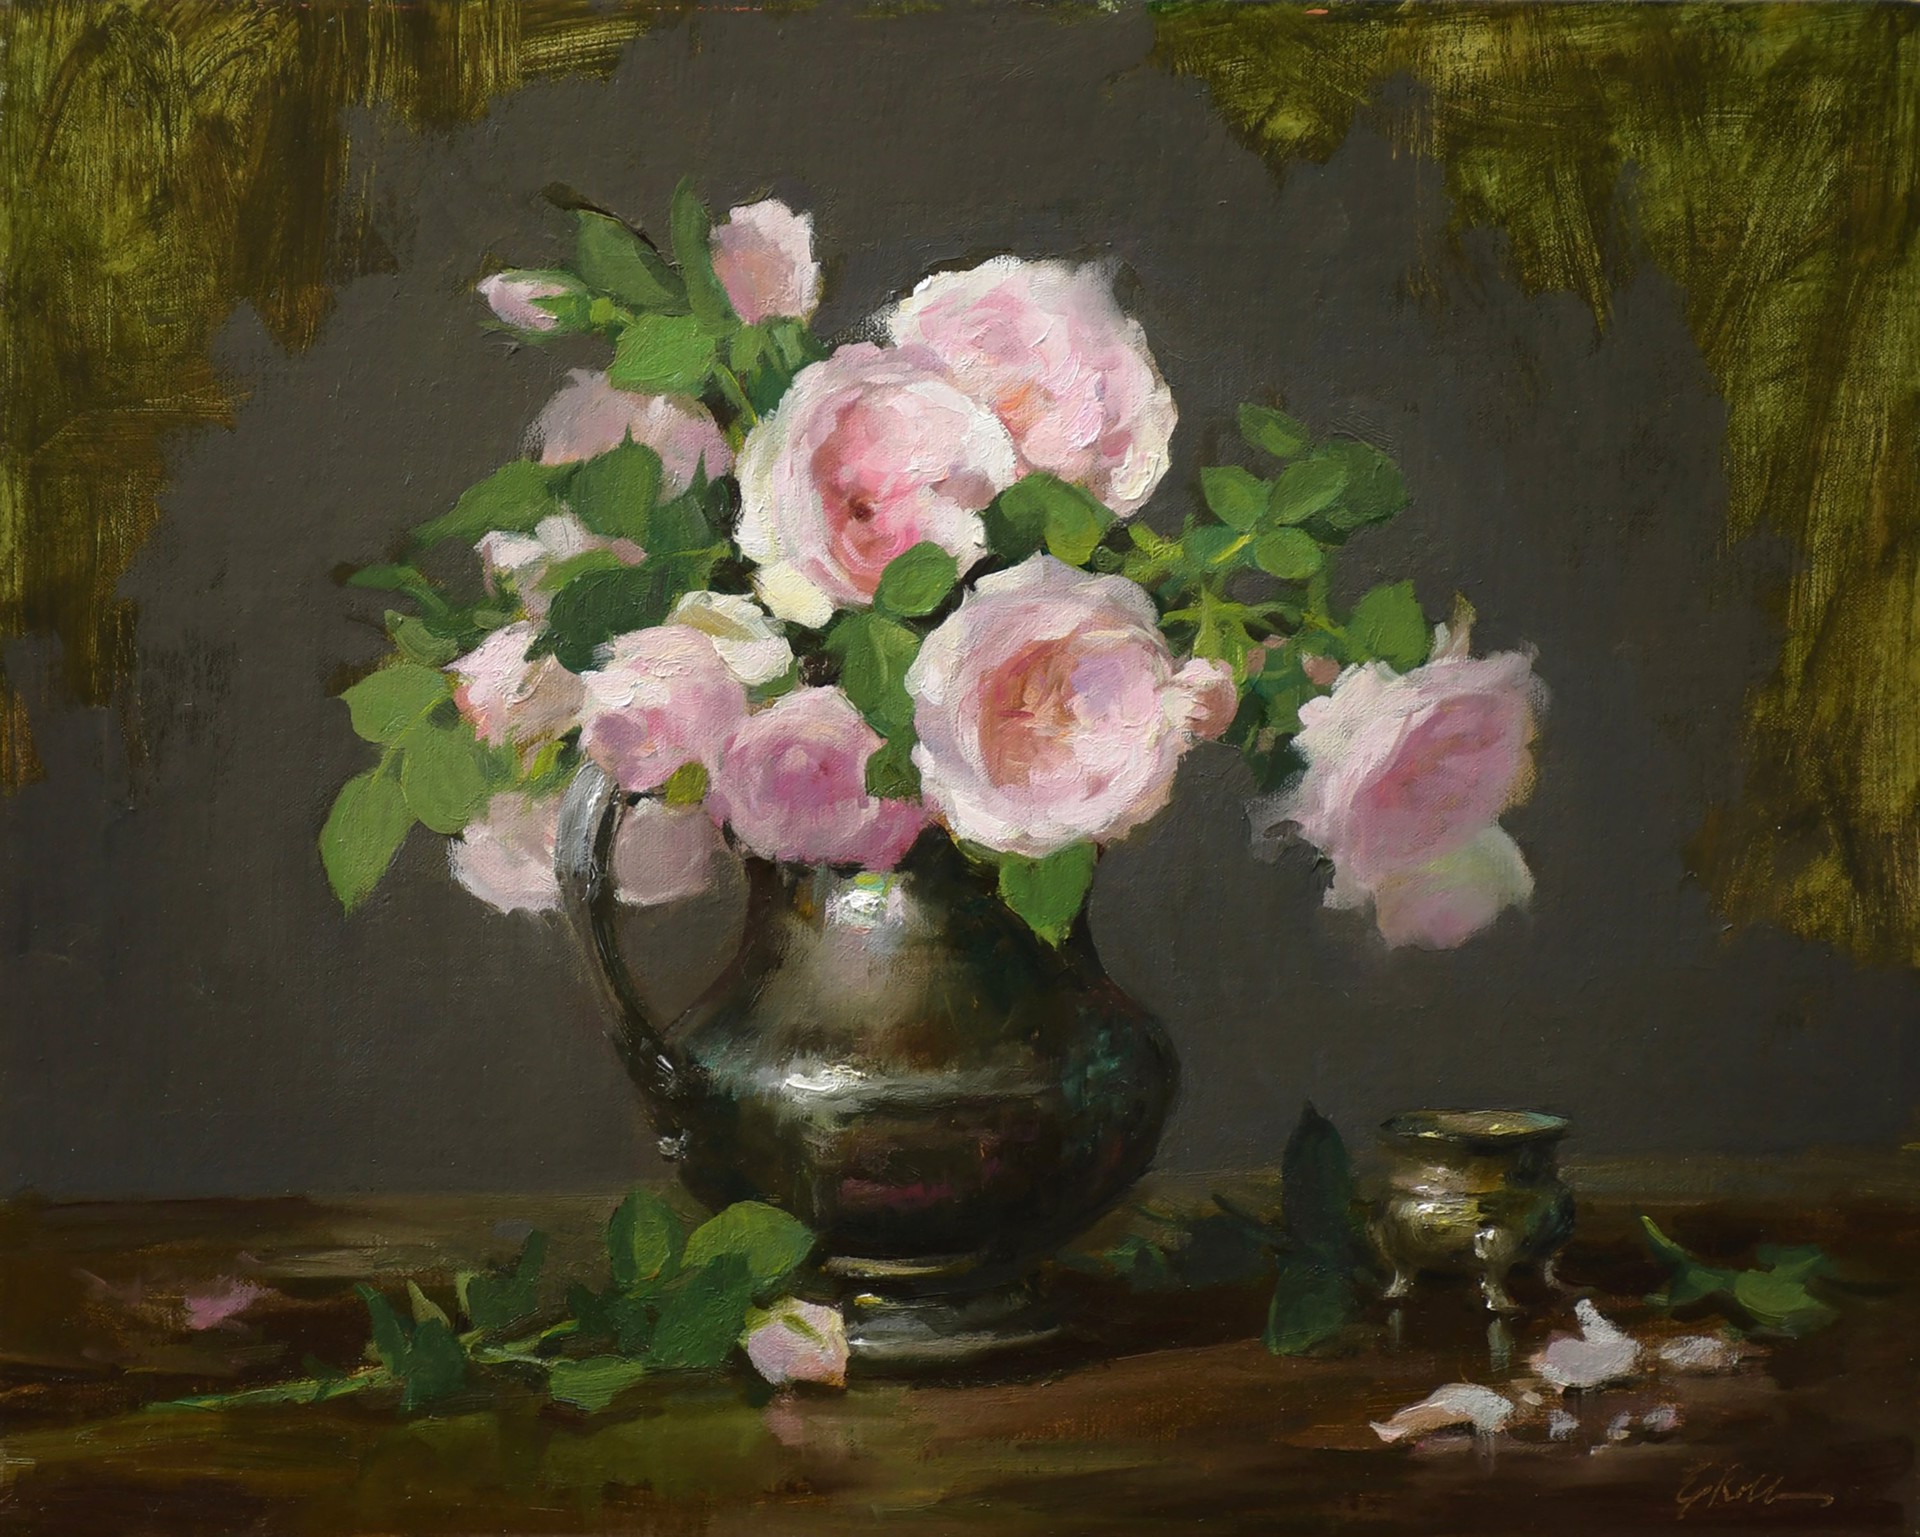 All About the Roses by Elizabeth Robbins